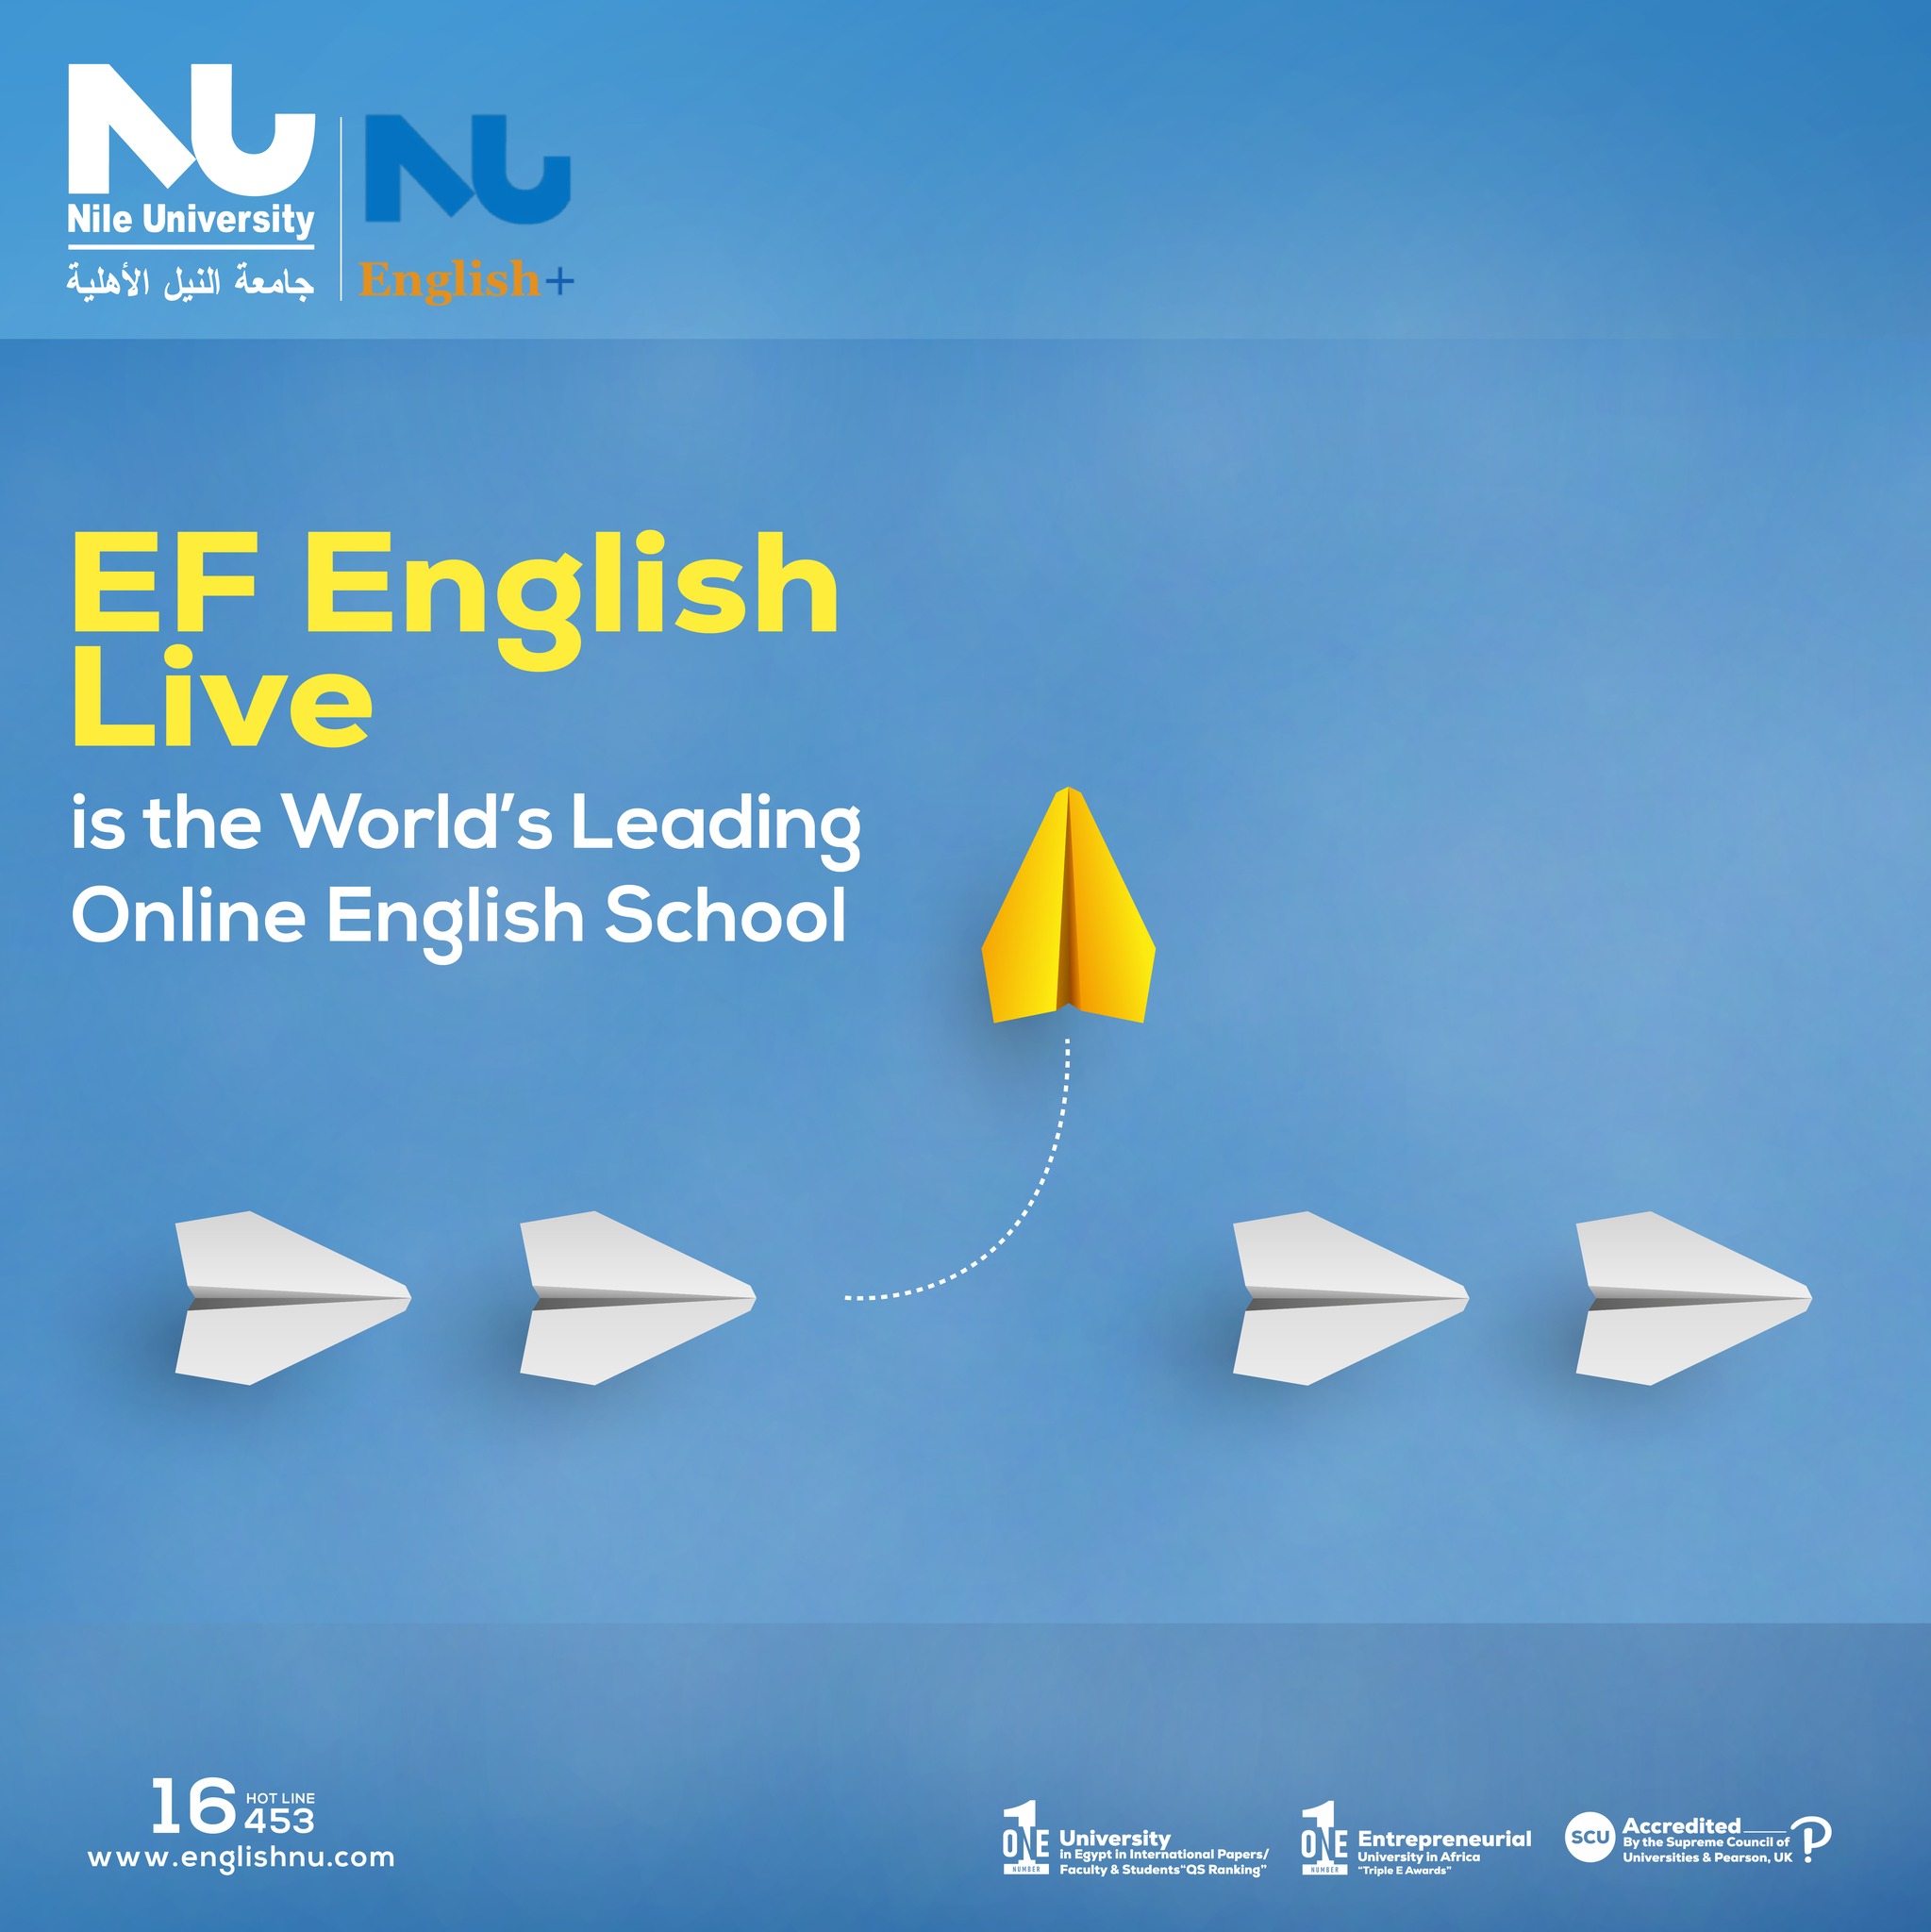 NU is partnering with EF English Live